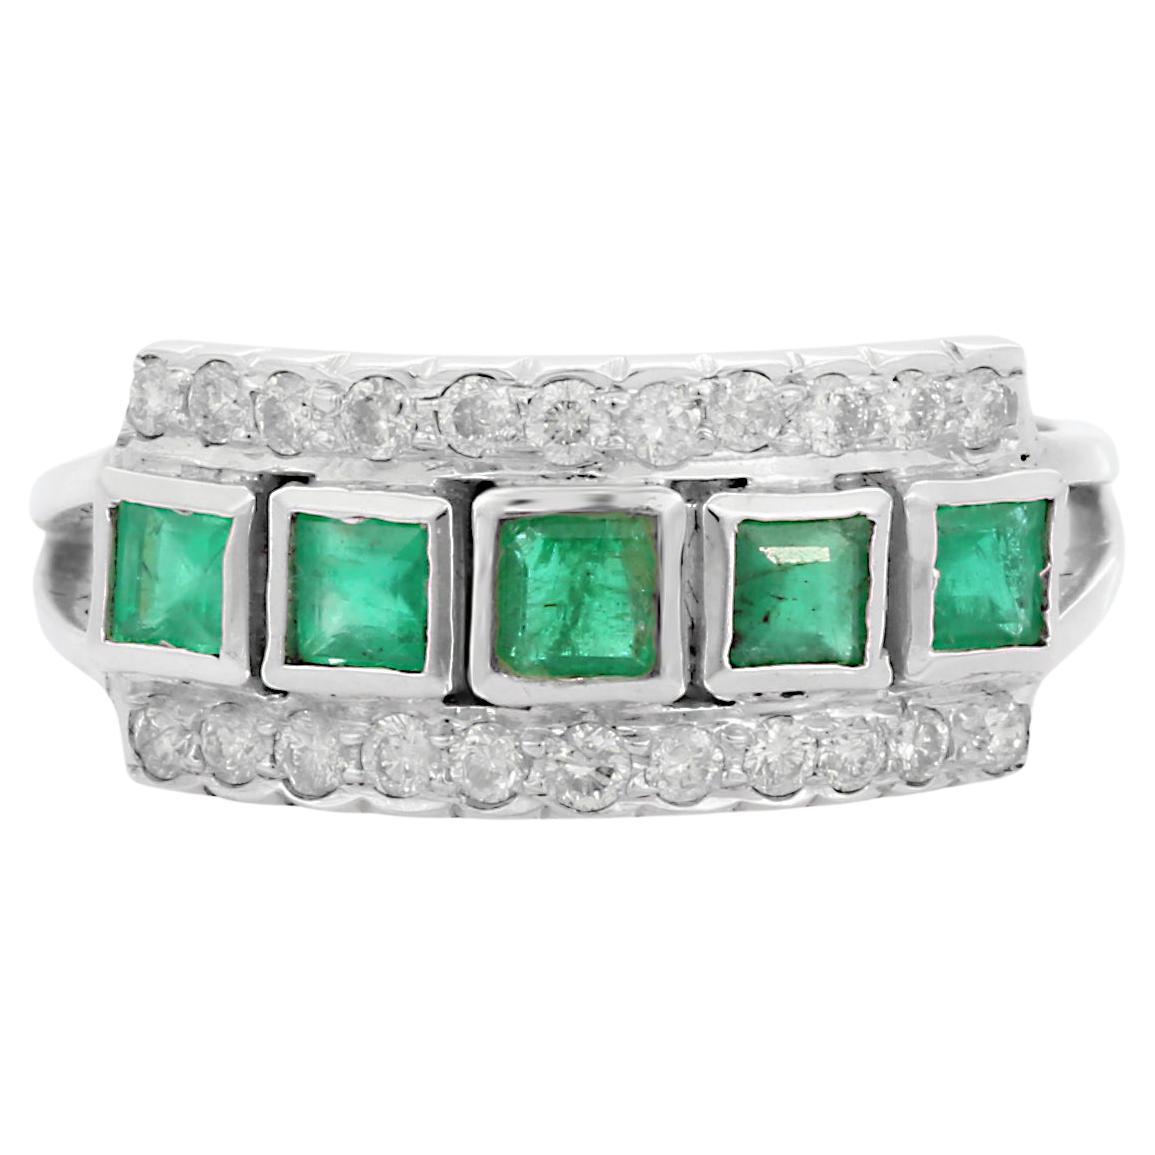 For Sale:  Statement 18k Solid White Gold Square Emerald Diamond Ring 3